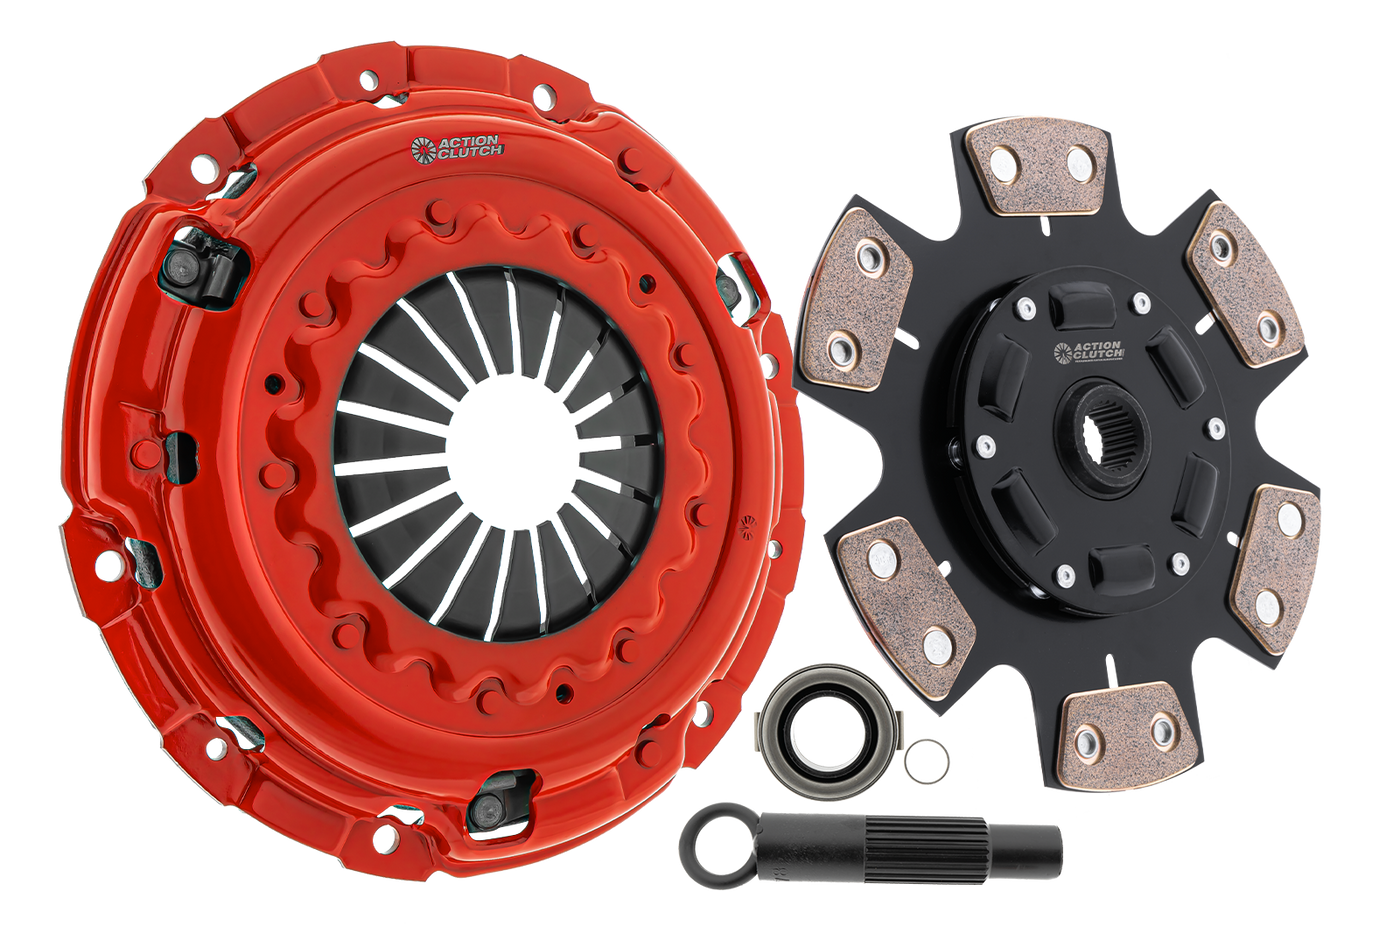 Stage 3 Clutch Kit (1MS) for Toyota 4Runner 1984-1988 2.4L SOHC (22R, 22RE) RWD/4WD RWD/4WD